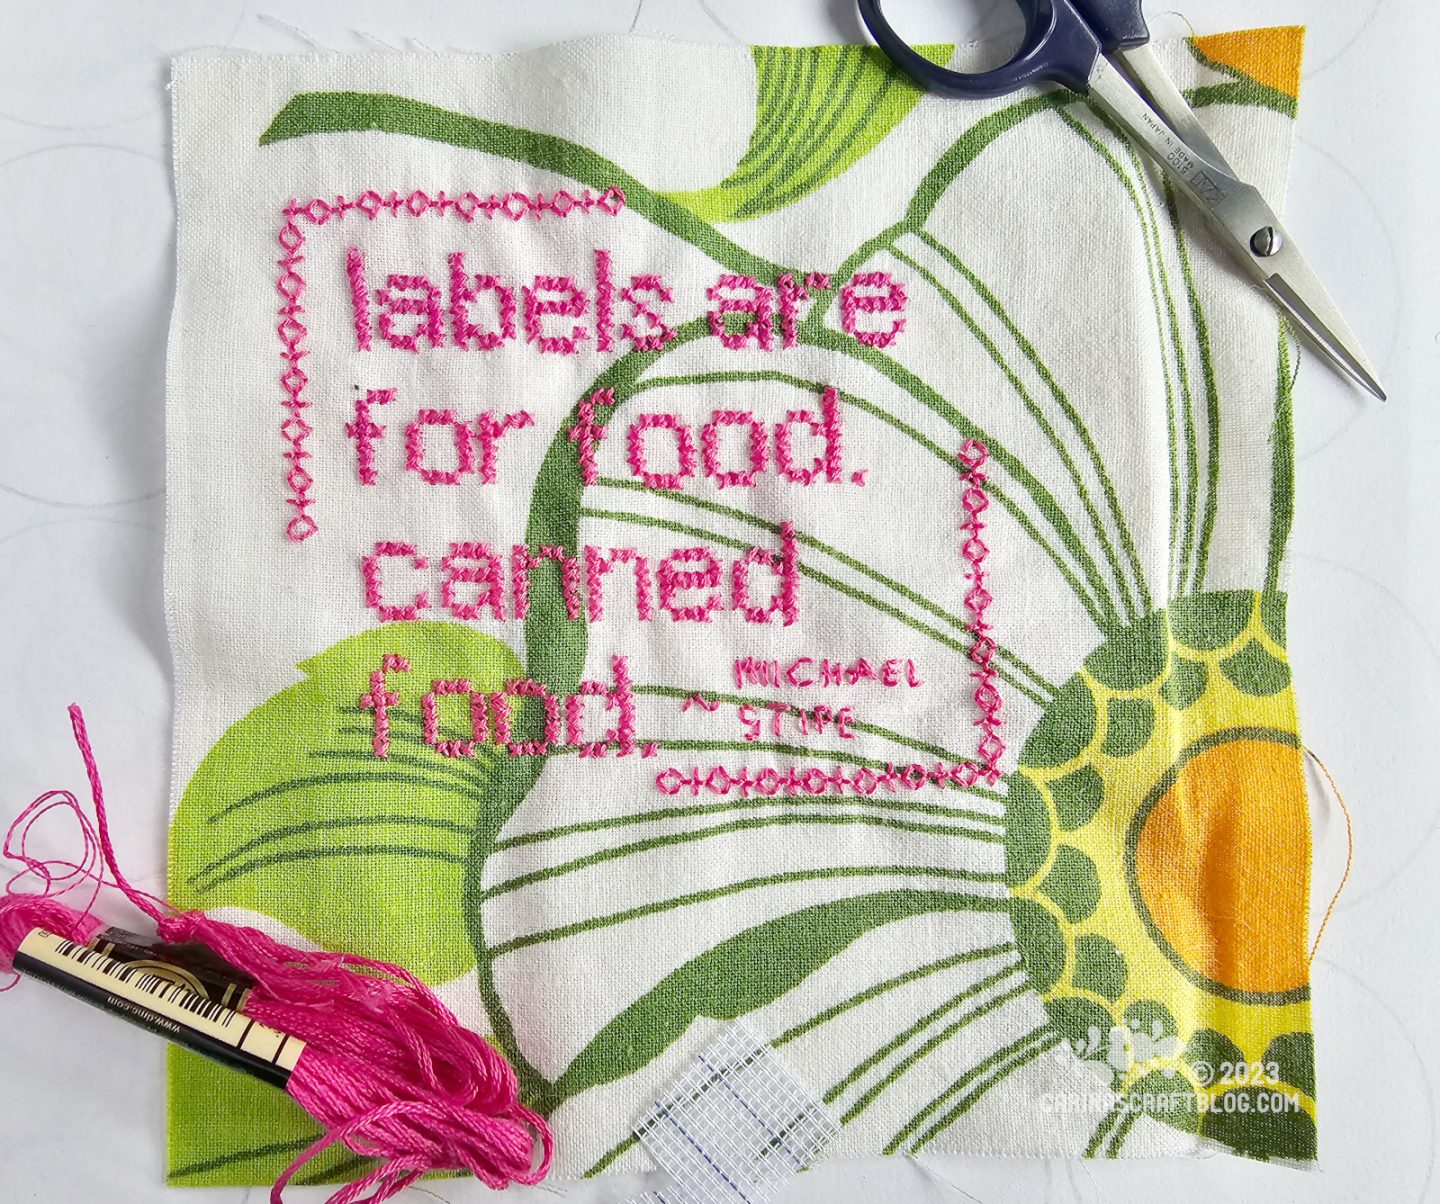 Close overhead view of a square of fabric showing a partial print of a large flower. On the fabric is a quote stitched in cross stitches: Labels are for food, canned food. Michael Stipe.